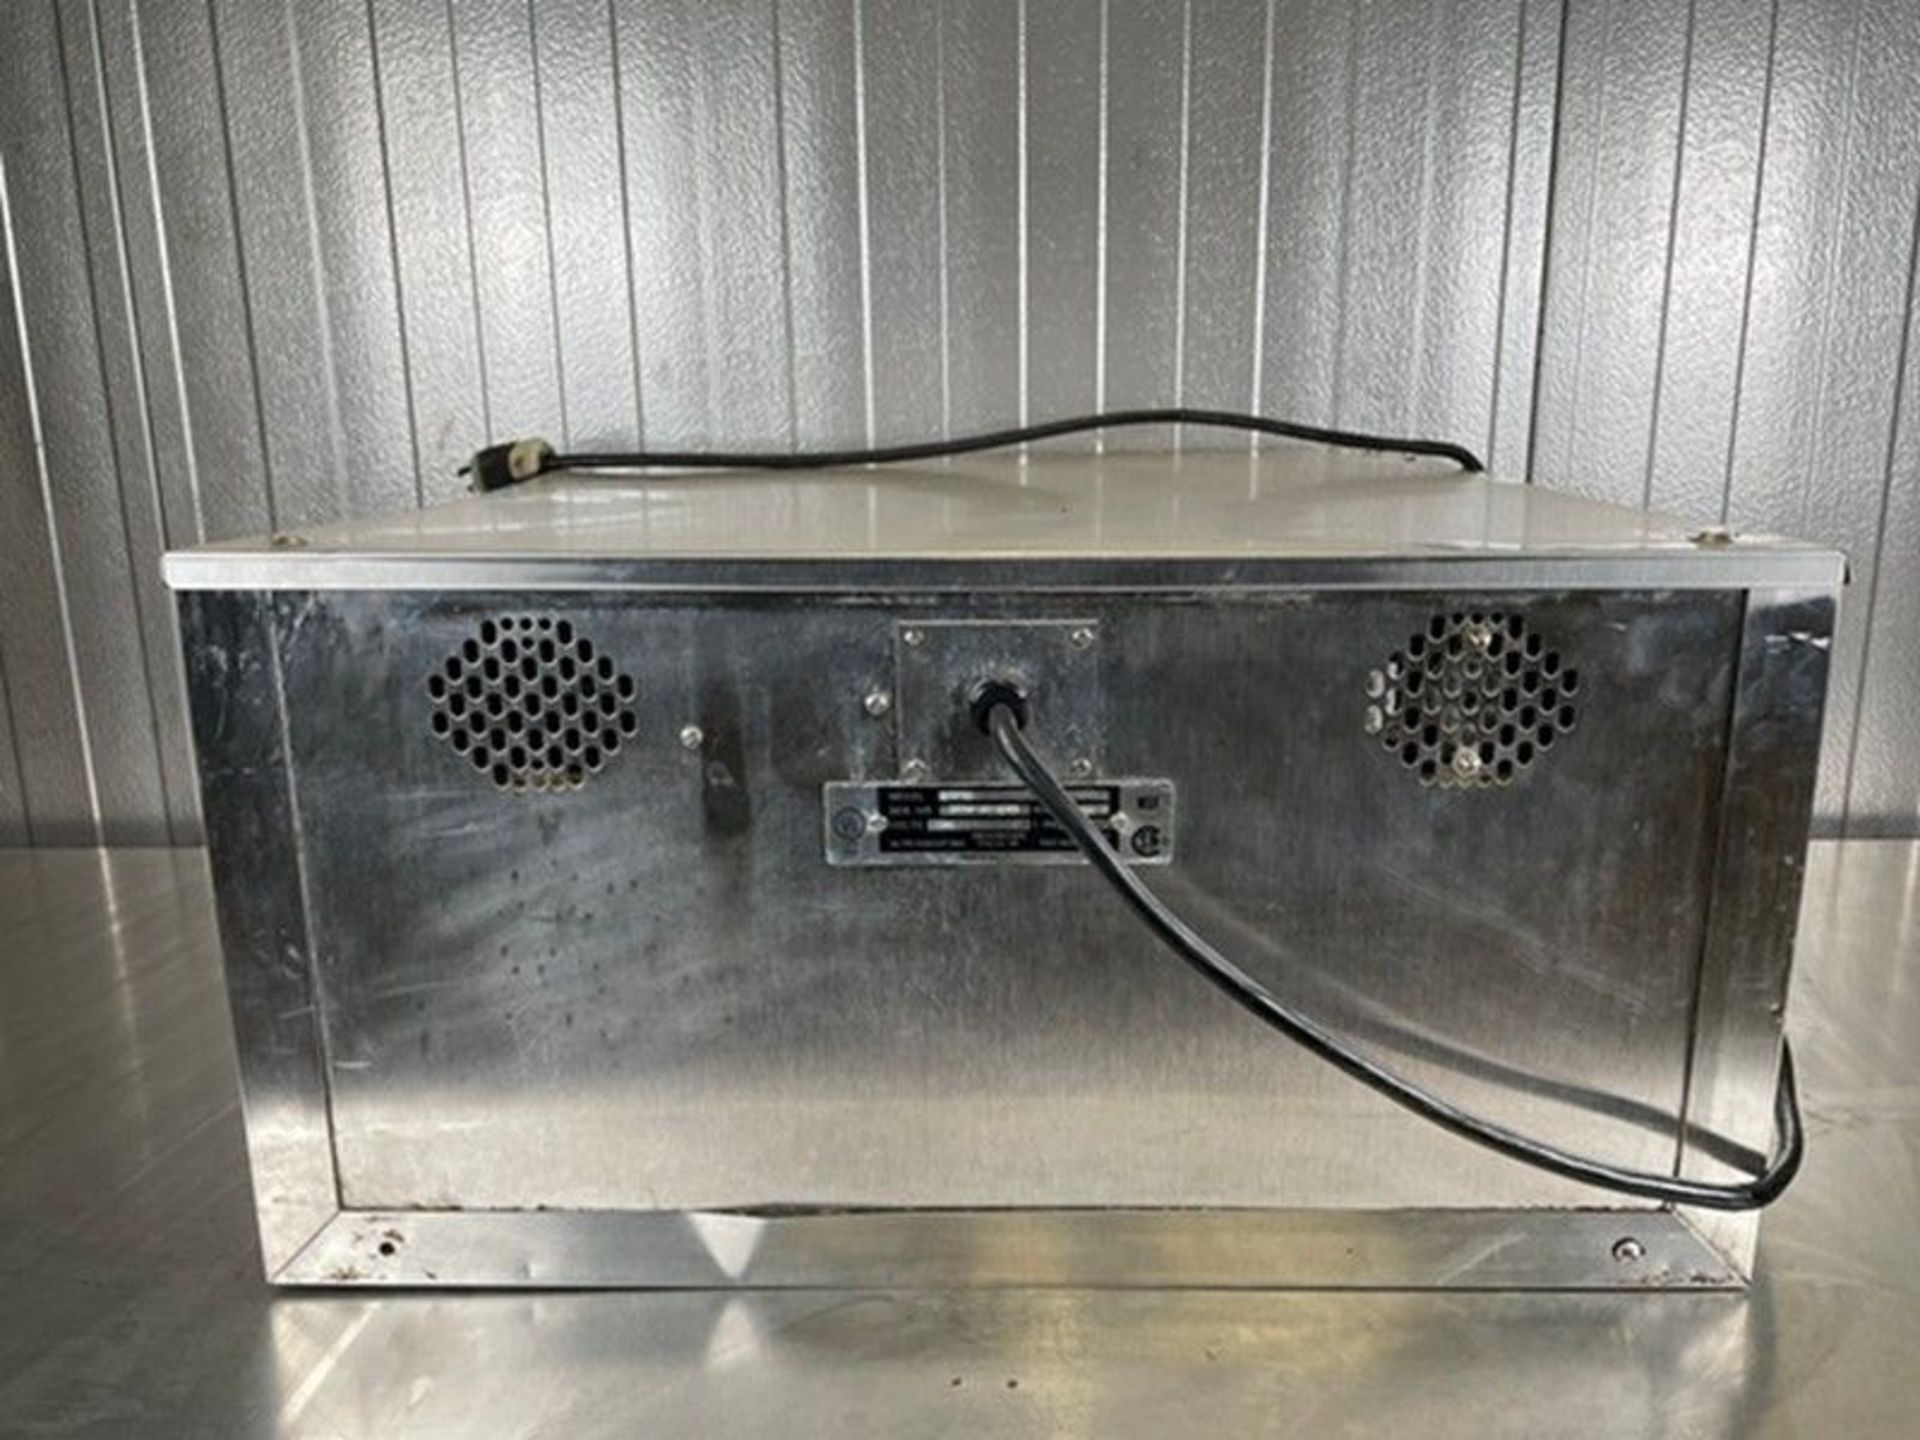 Auto-Sham Food Warmer, 110 Volts, 1 Phase, S/S Design (Auction ID 90c655c1) (Handling, Loading, & - Image 2 of 5